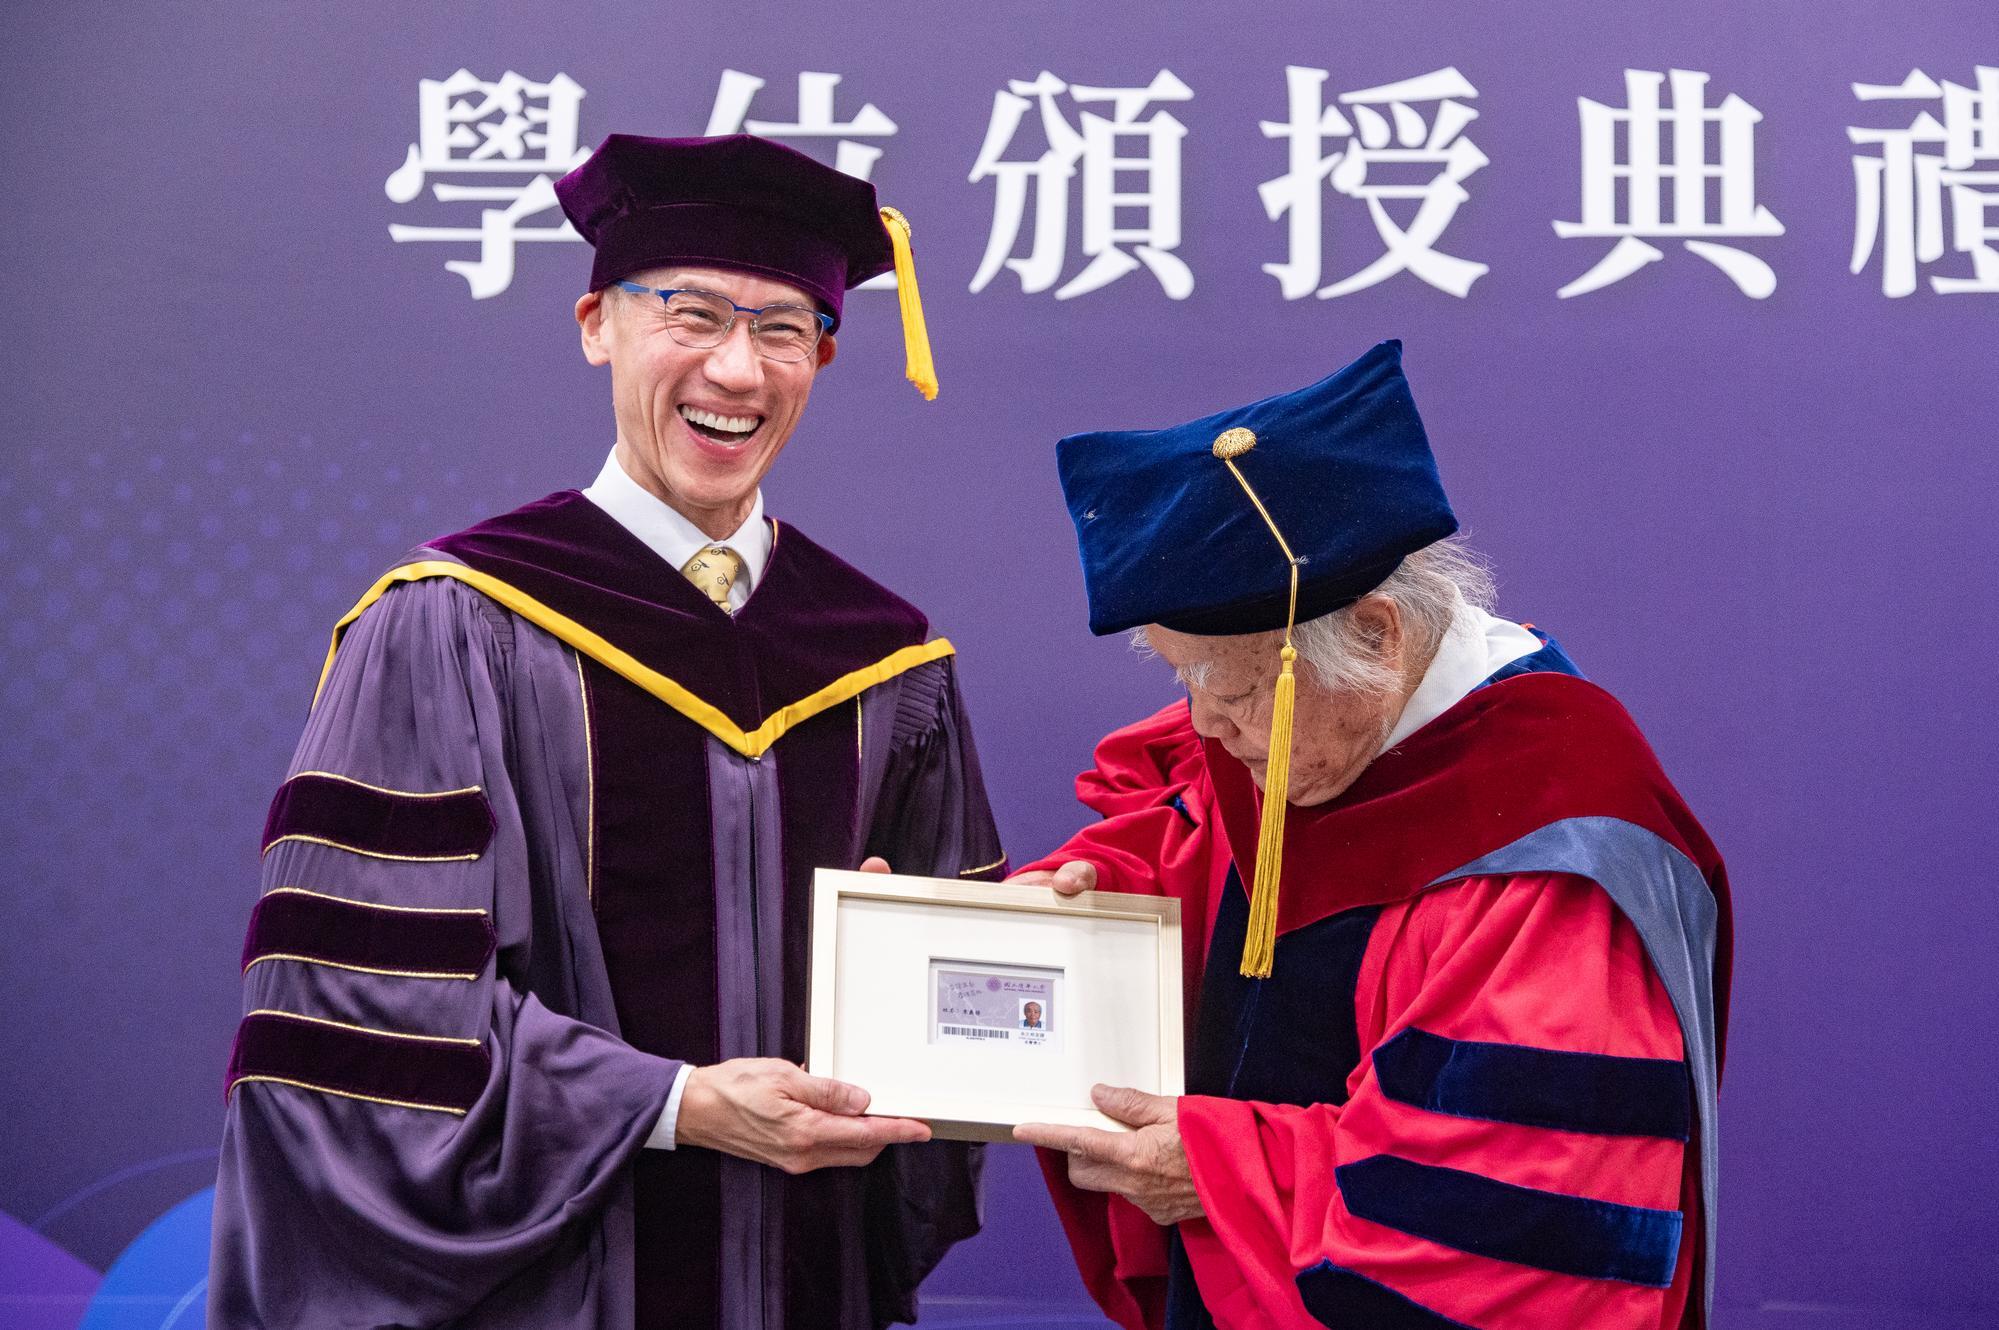 Dr. Yi-Fa Lee (李義發) (right) carefully examines the framed Permanent Alumni Card, realizing the benefits of borrowing books from the NTHU library and enjoying parking privileges.